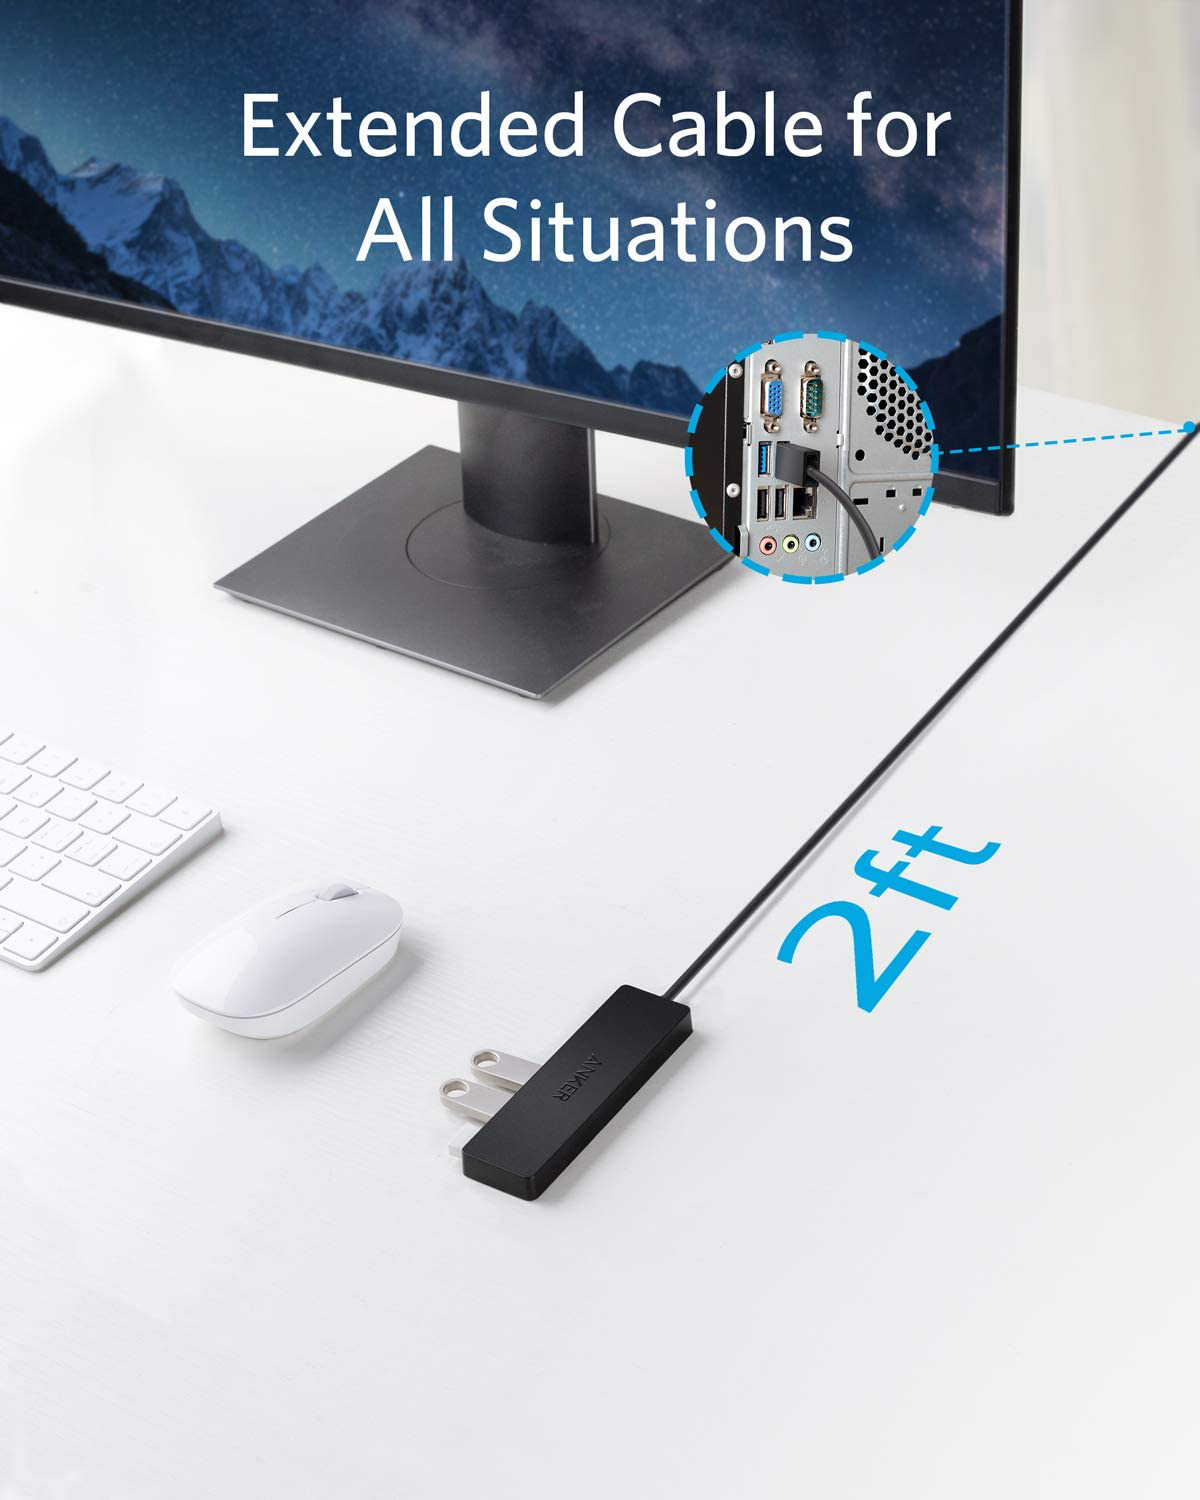 Anker 4-Port USB 3.0 Hub, Ultra-Slim Data USB Hub with 2 Ft Extended Cable [Charging Not Supported], for Macbook, Mac Pro, Mac Mini, Imac, Surface Pro, XPS, PC, Flash Drive, Mobile HDD Animals & Pet Supplies > Pet Supplies > Reptile & Amphibian Supplies > Reptile & Amphibian Substrates Anker   